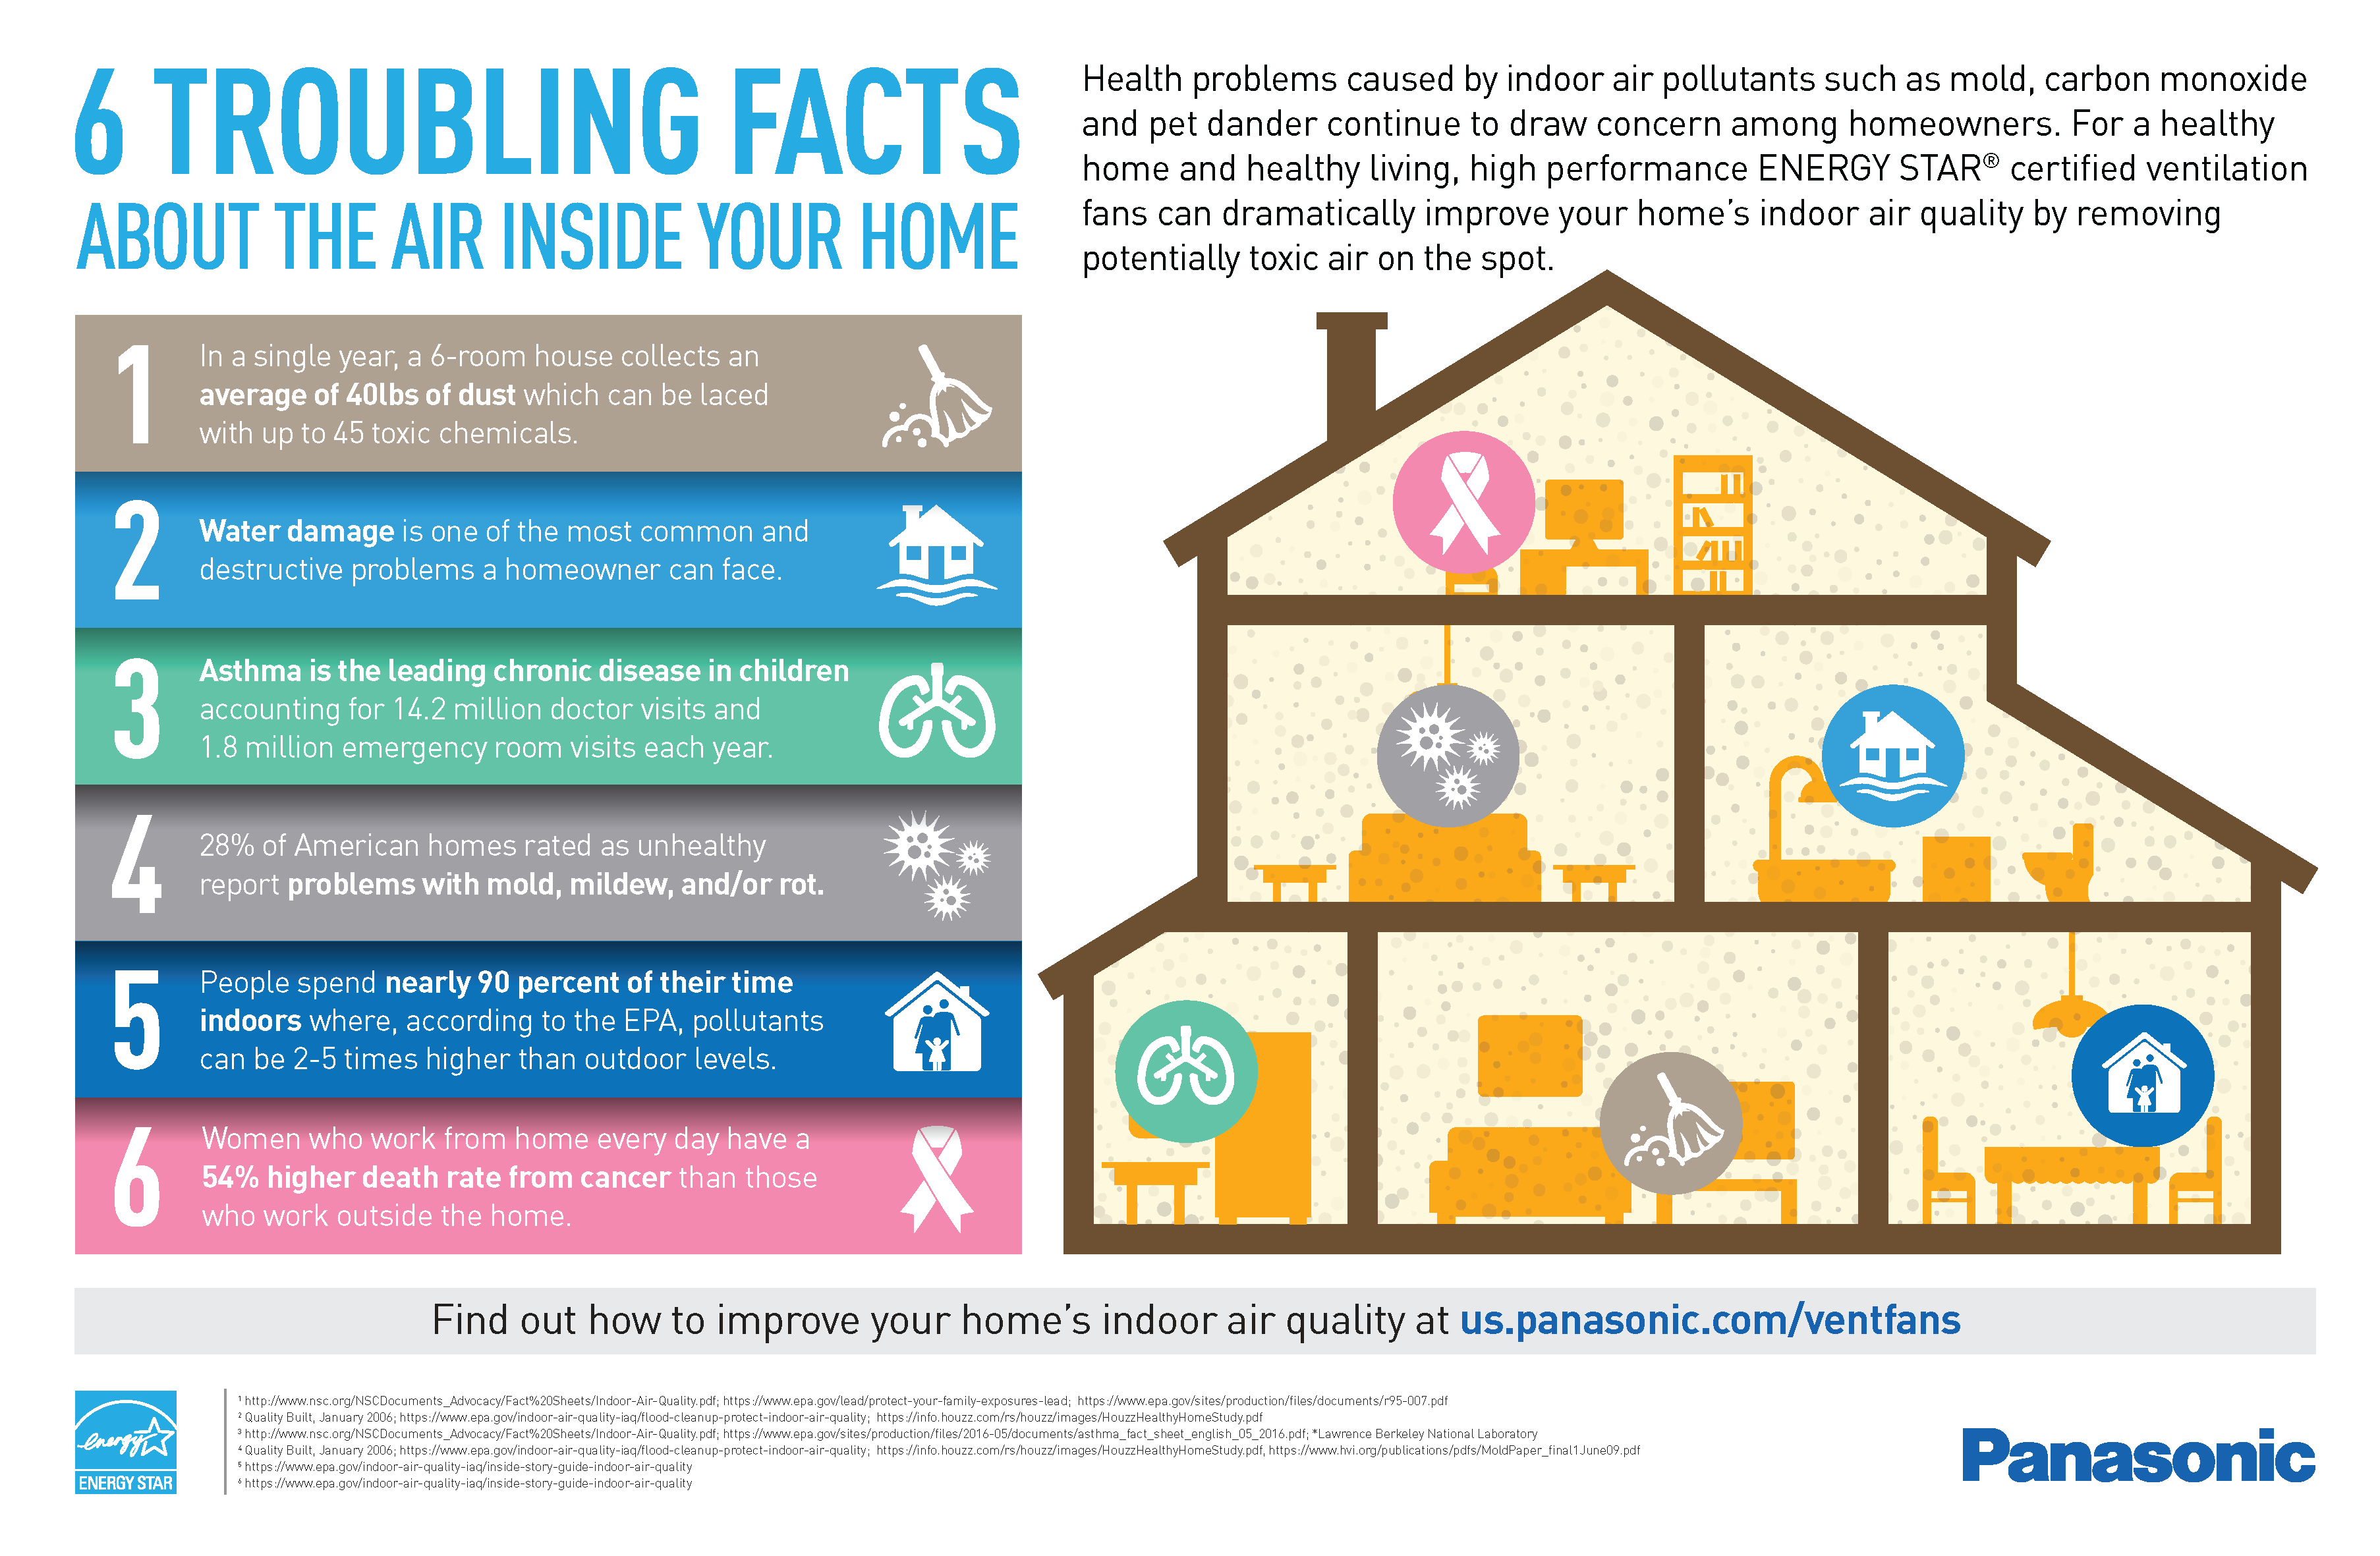 6 facts on poor indoor air quality in your home. Illustration by Panasonic.